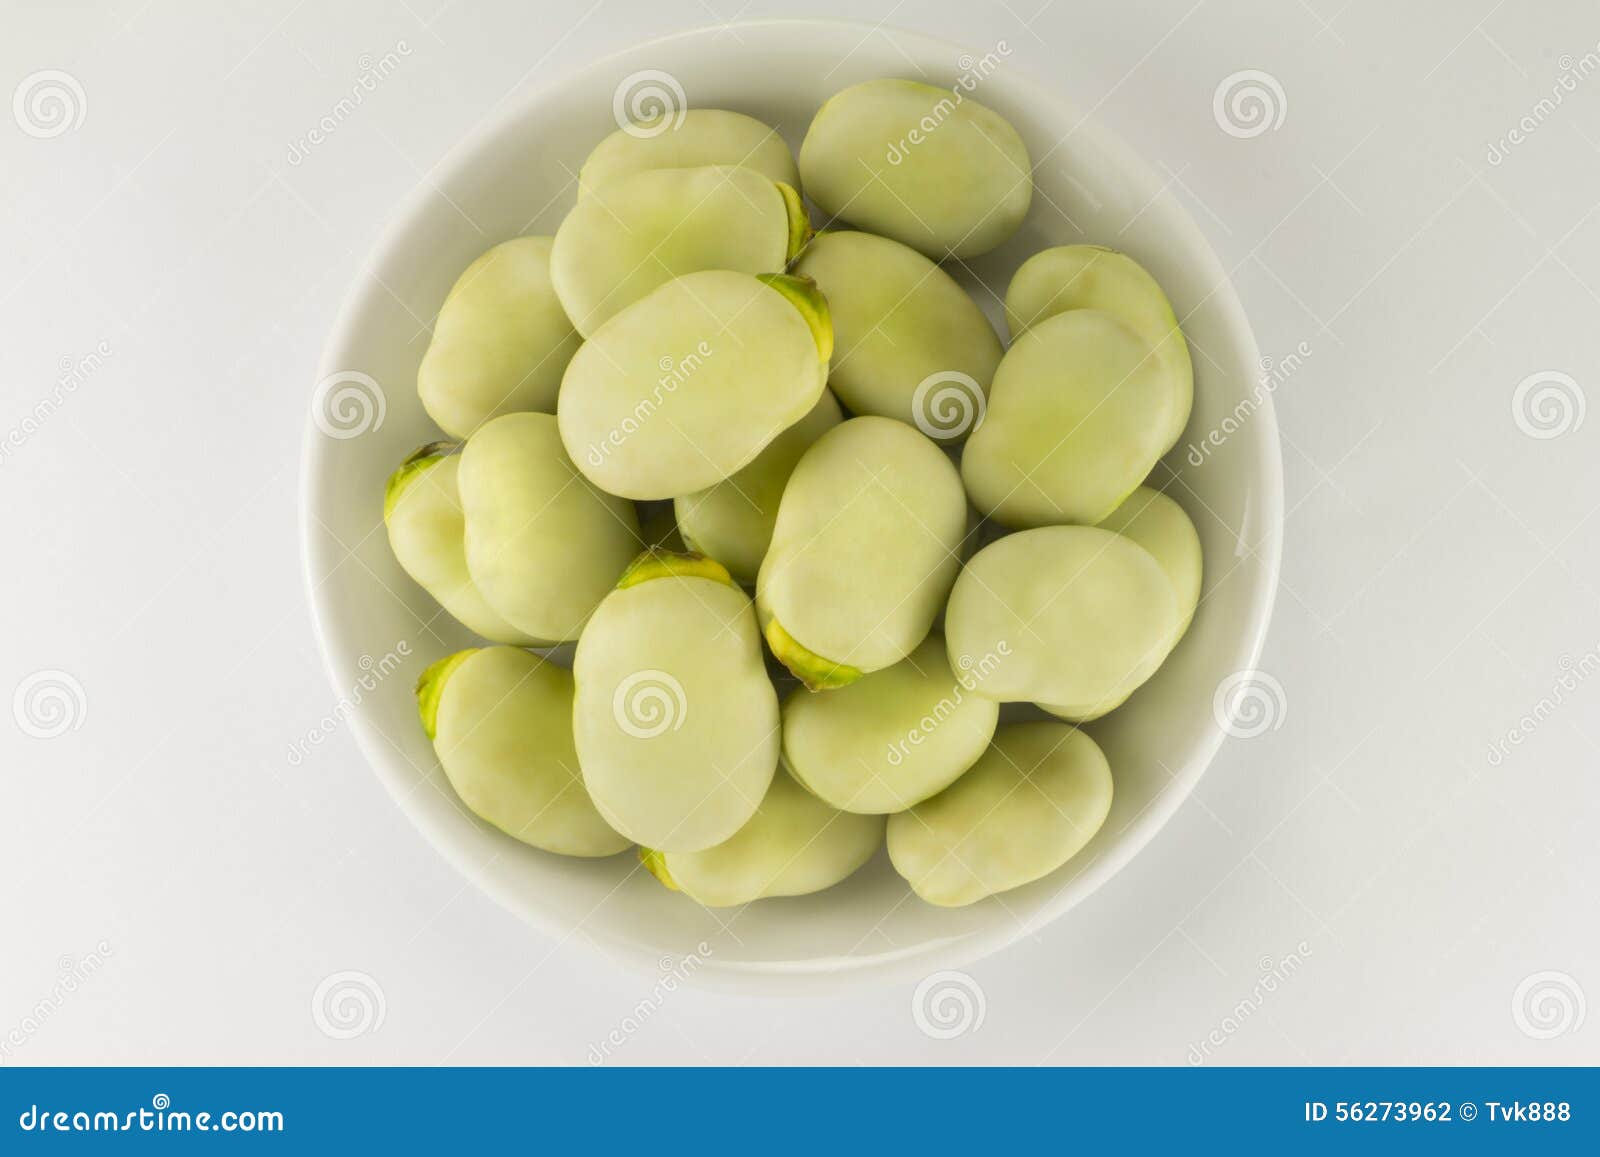 Beans on a saucer stock photo. Image of acid, diet, manganese - 56273962